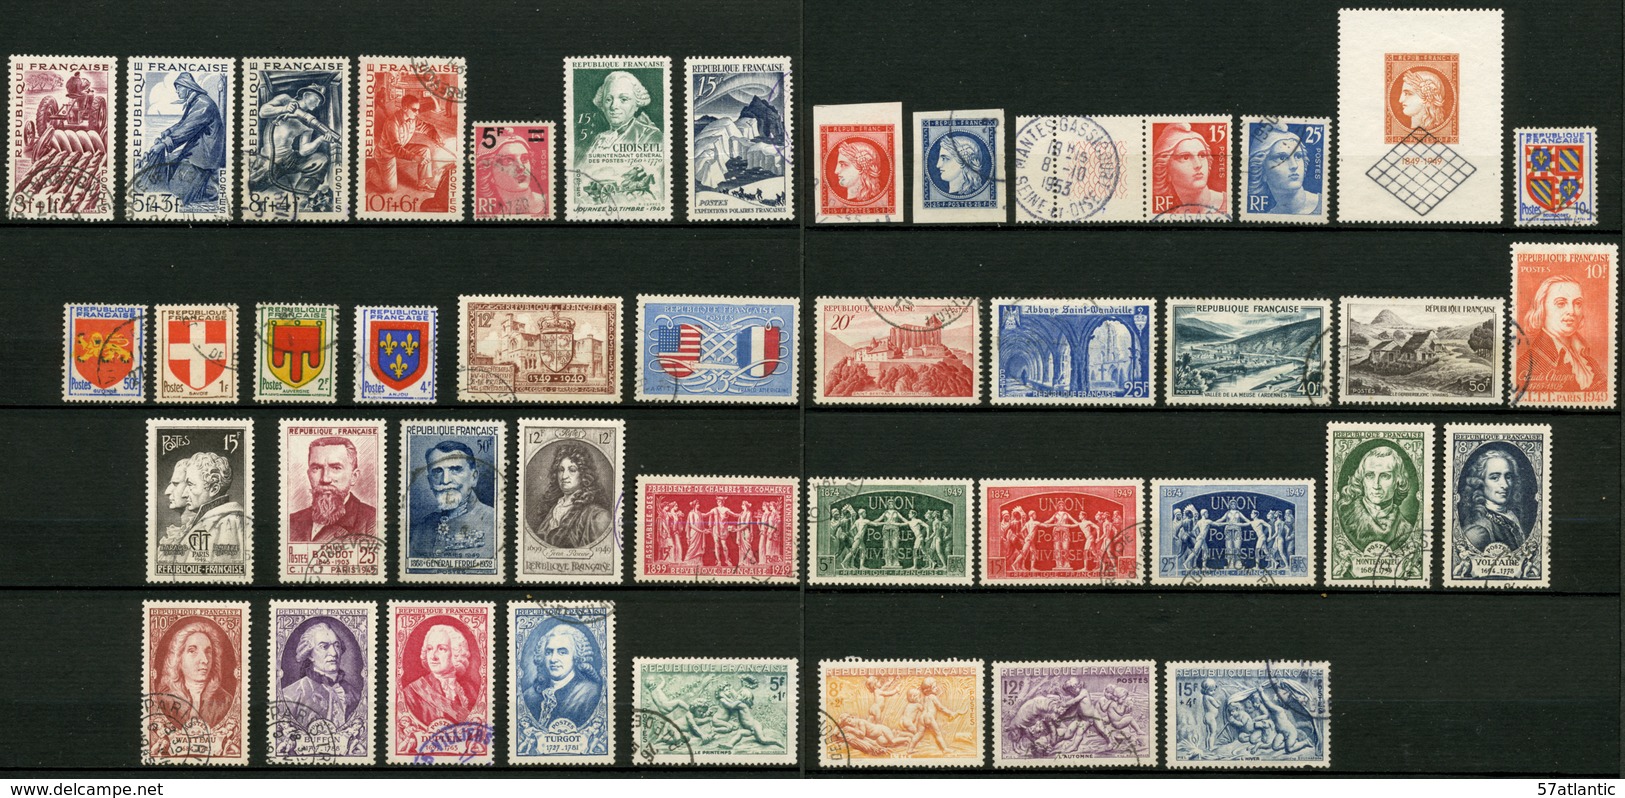 FRANCE - ANNEE COMPLETE 1949 - YT 823 à 862 - 42 TIMBRES OBLITERES - 1940-1949